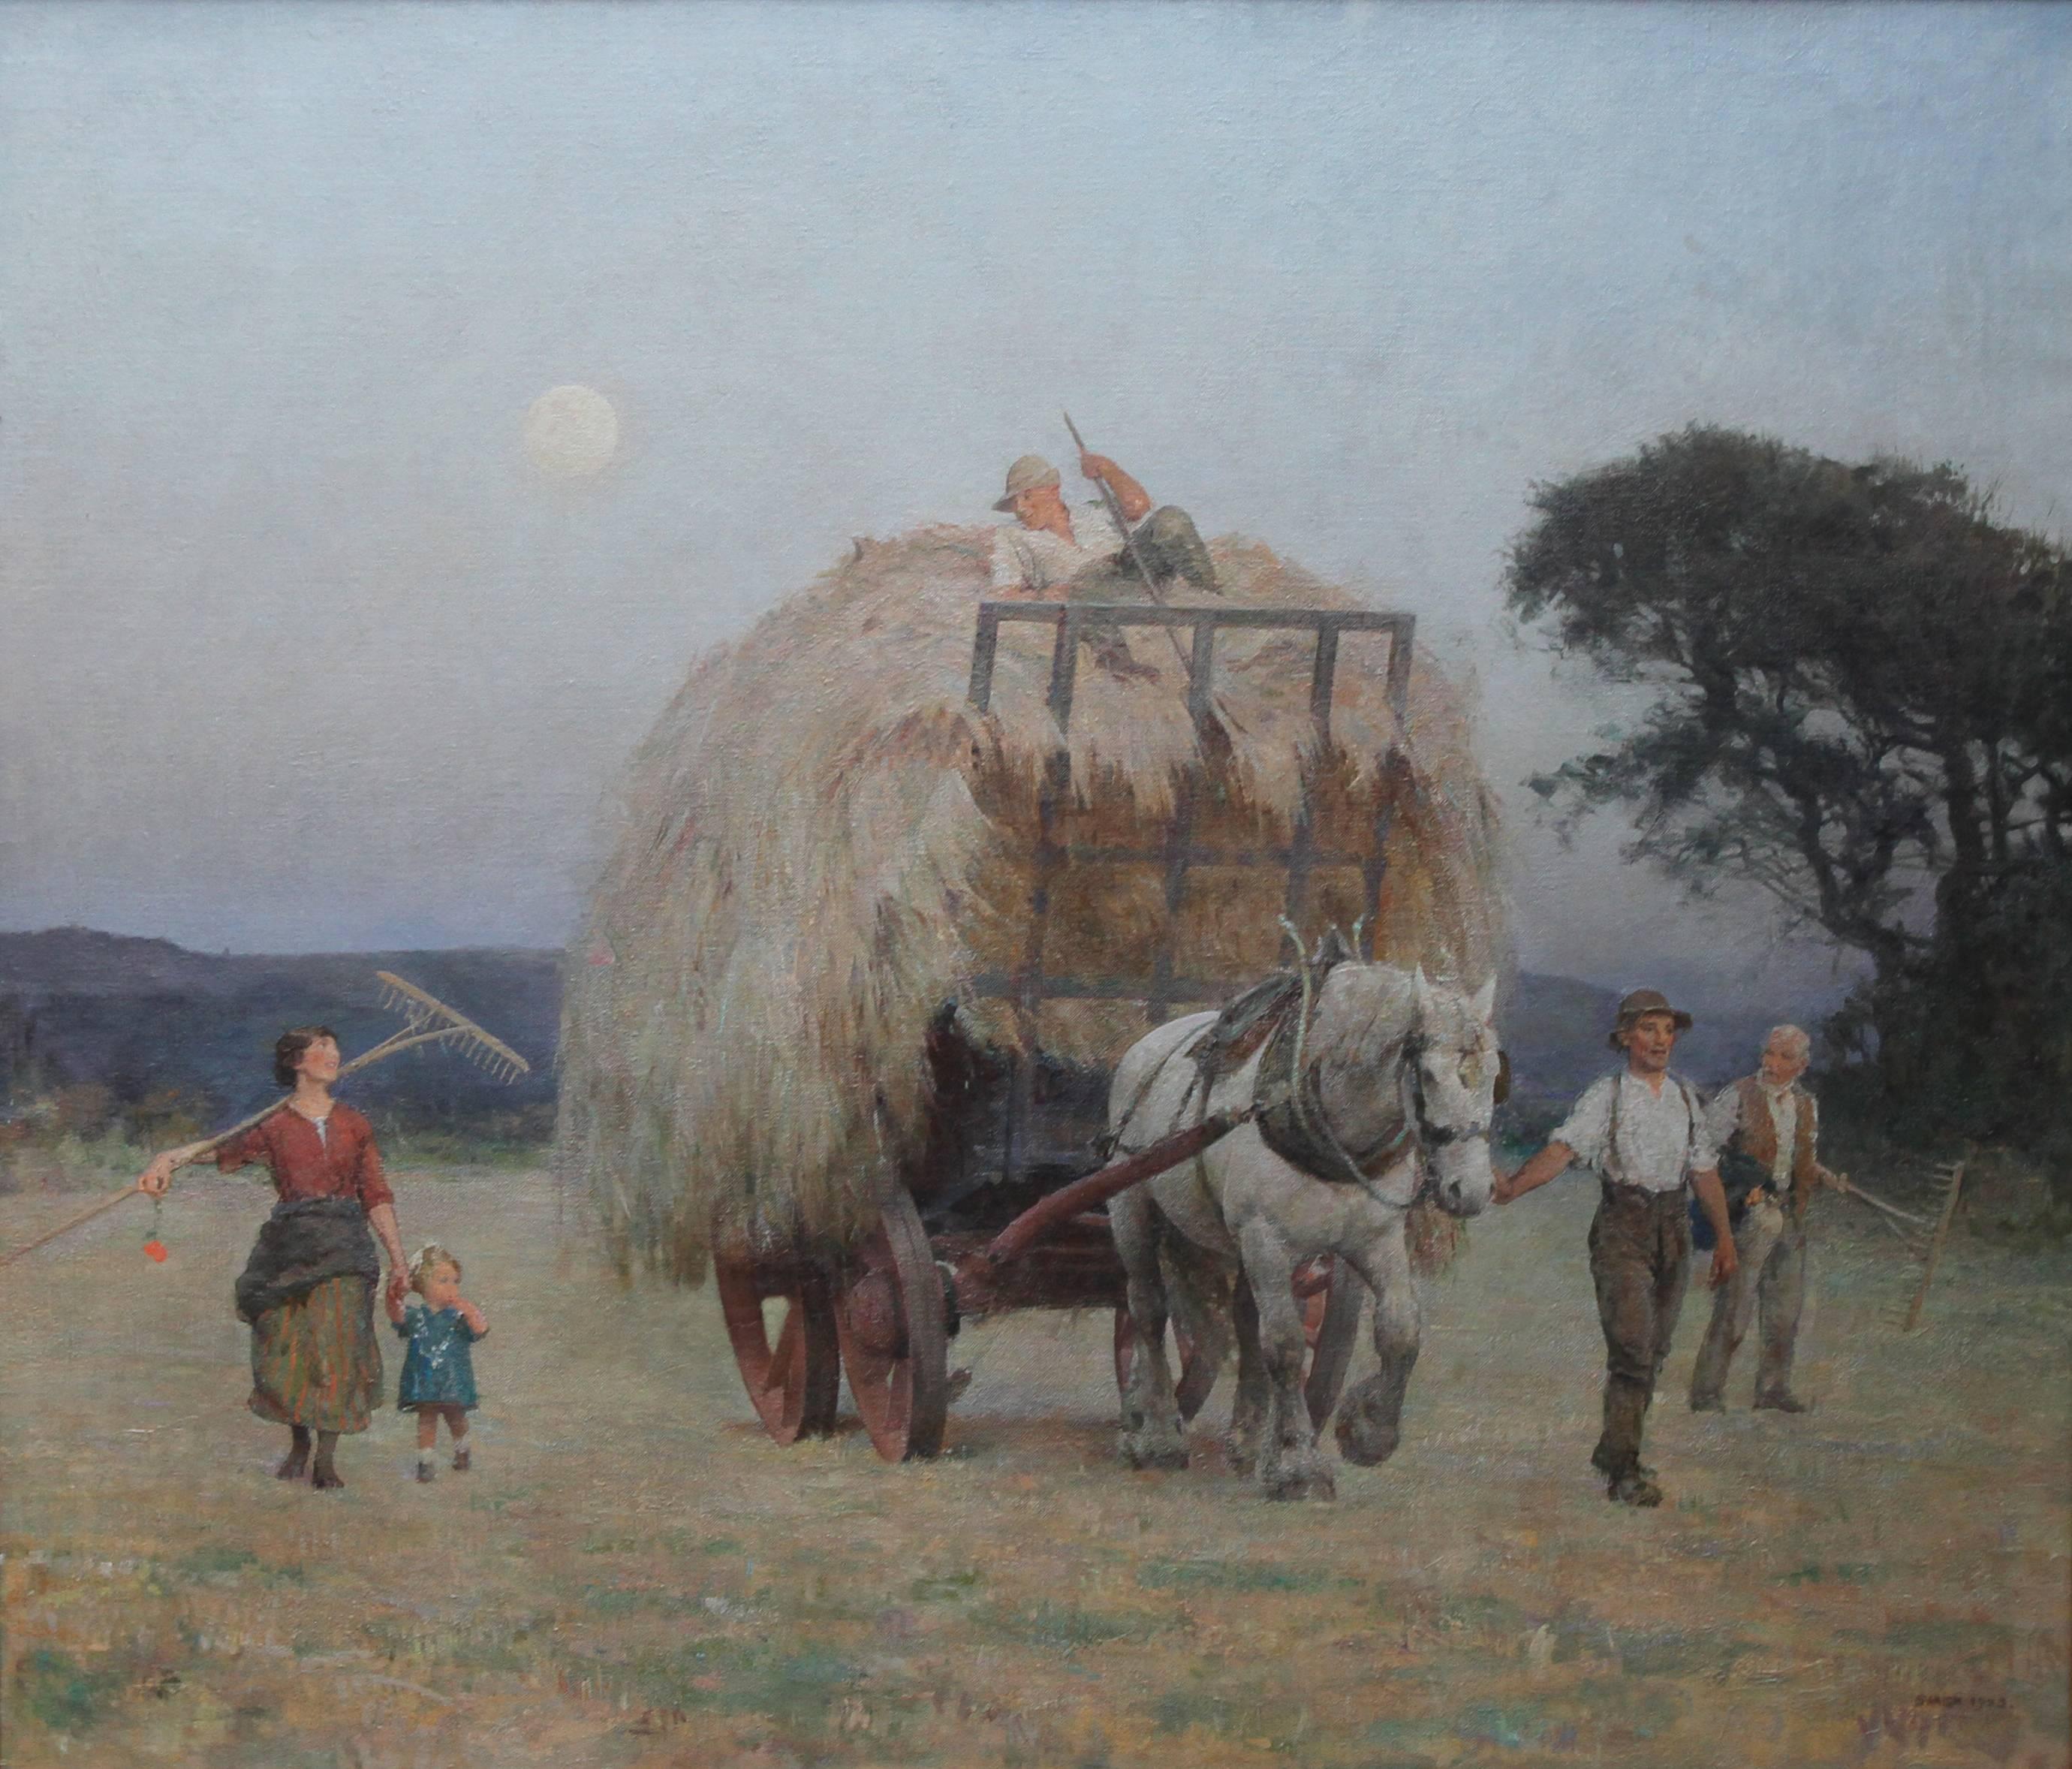 The Close of Day - British 20s Art Deco exhibited oil painting harvest landscape - Painting by Frederick George Swaish